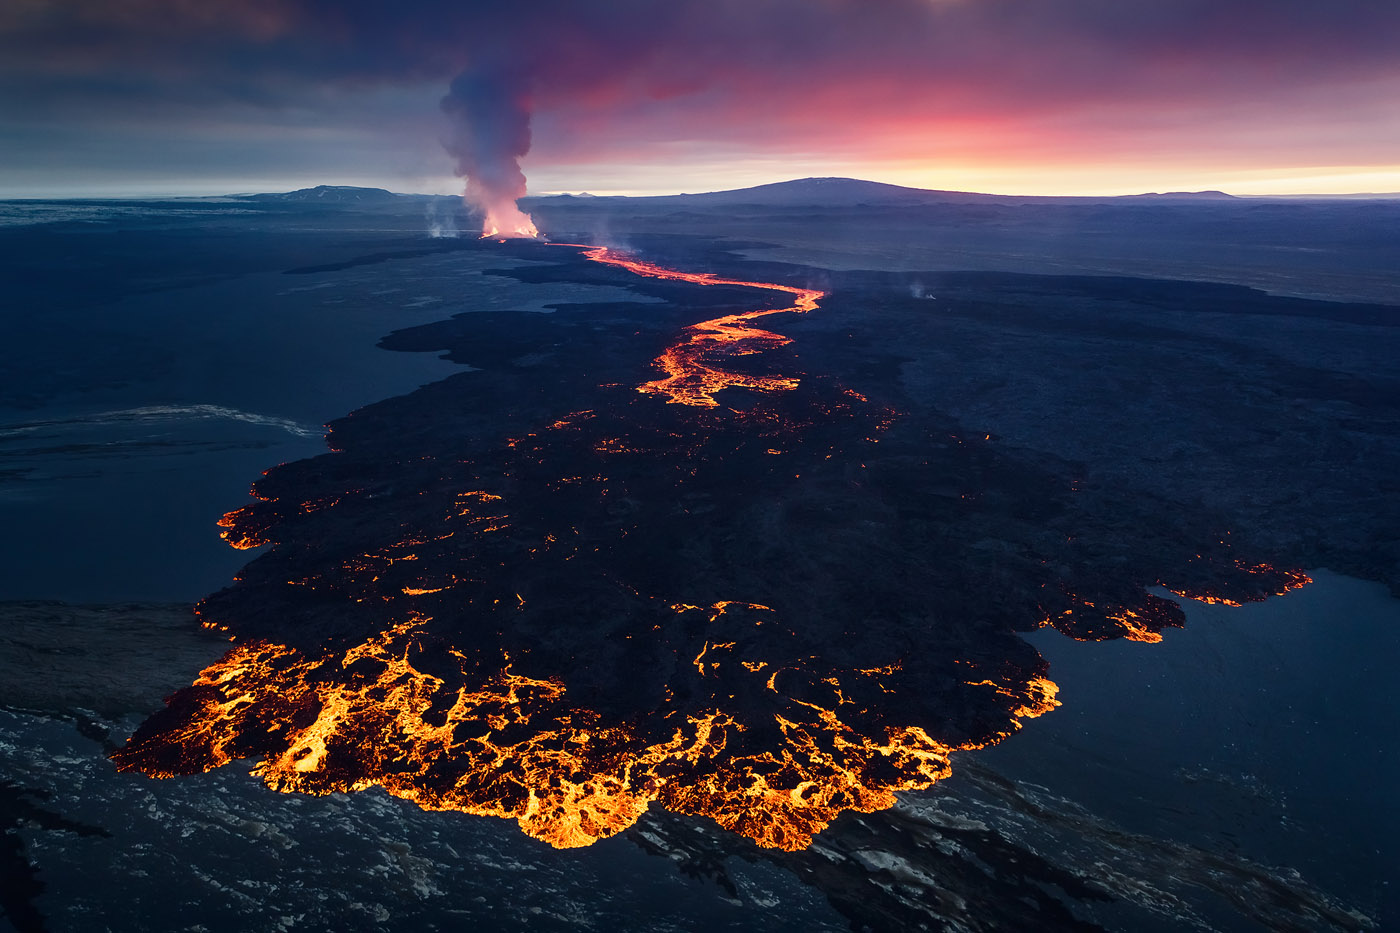 When shooting the 2014 Holuhraun volcanic eruption from a helicopter, I spent more than an hour shooting a mind-blowing sunset over the lava, and stayed well into darkness. A drone wouldn't have been able to remain airborne for long enough to get these conditions (not to mention get there!).<br />Canon 5D Mark II, Tamron 24-70mm F2.8 VC, 1/200 sec, f/4, ISO 1600. The Central Highlands of Iceland